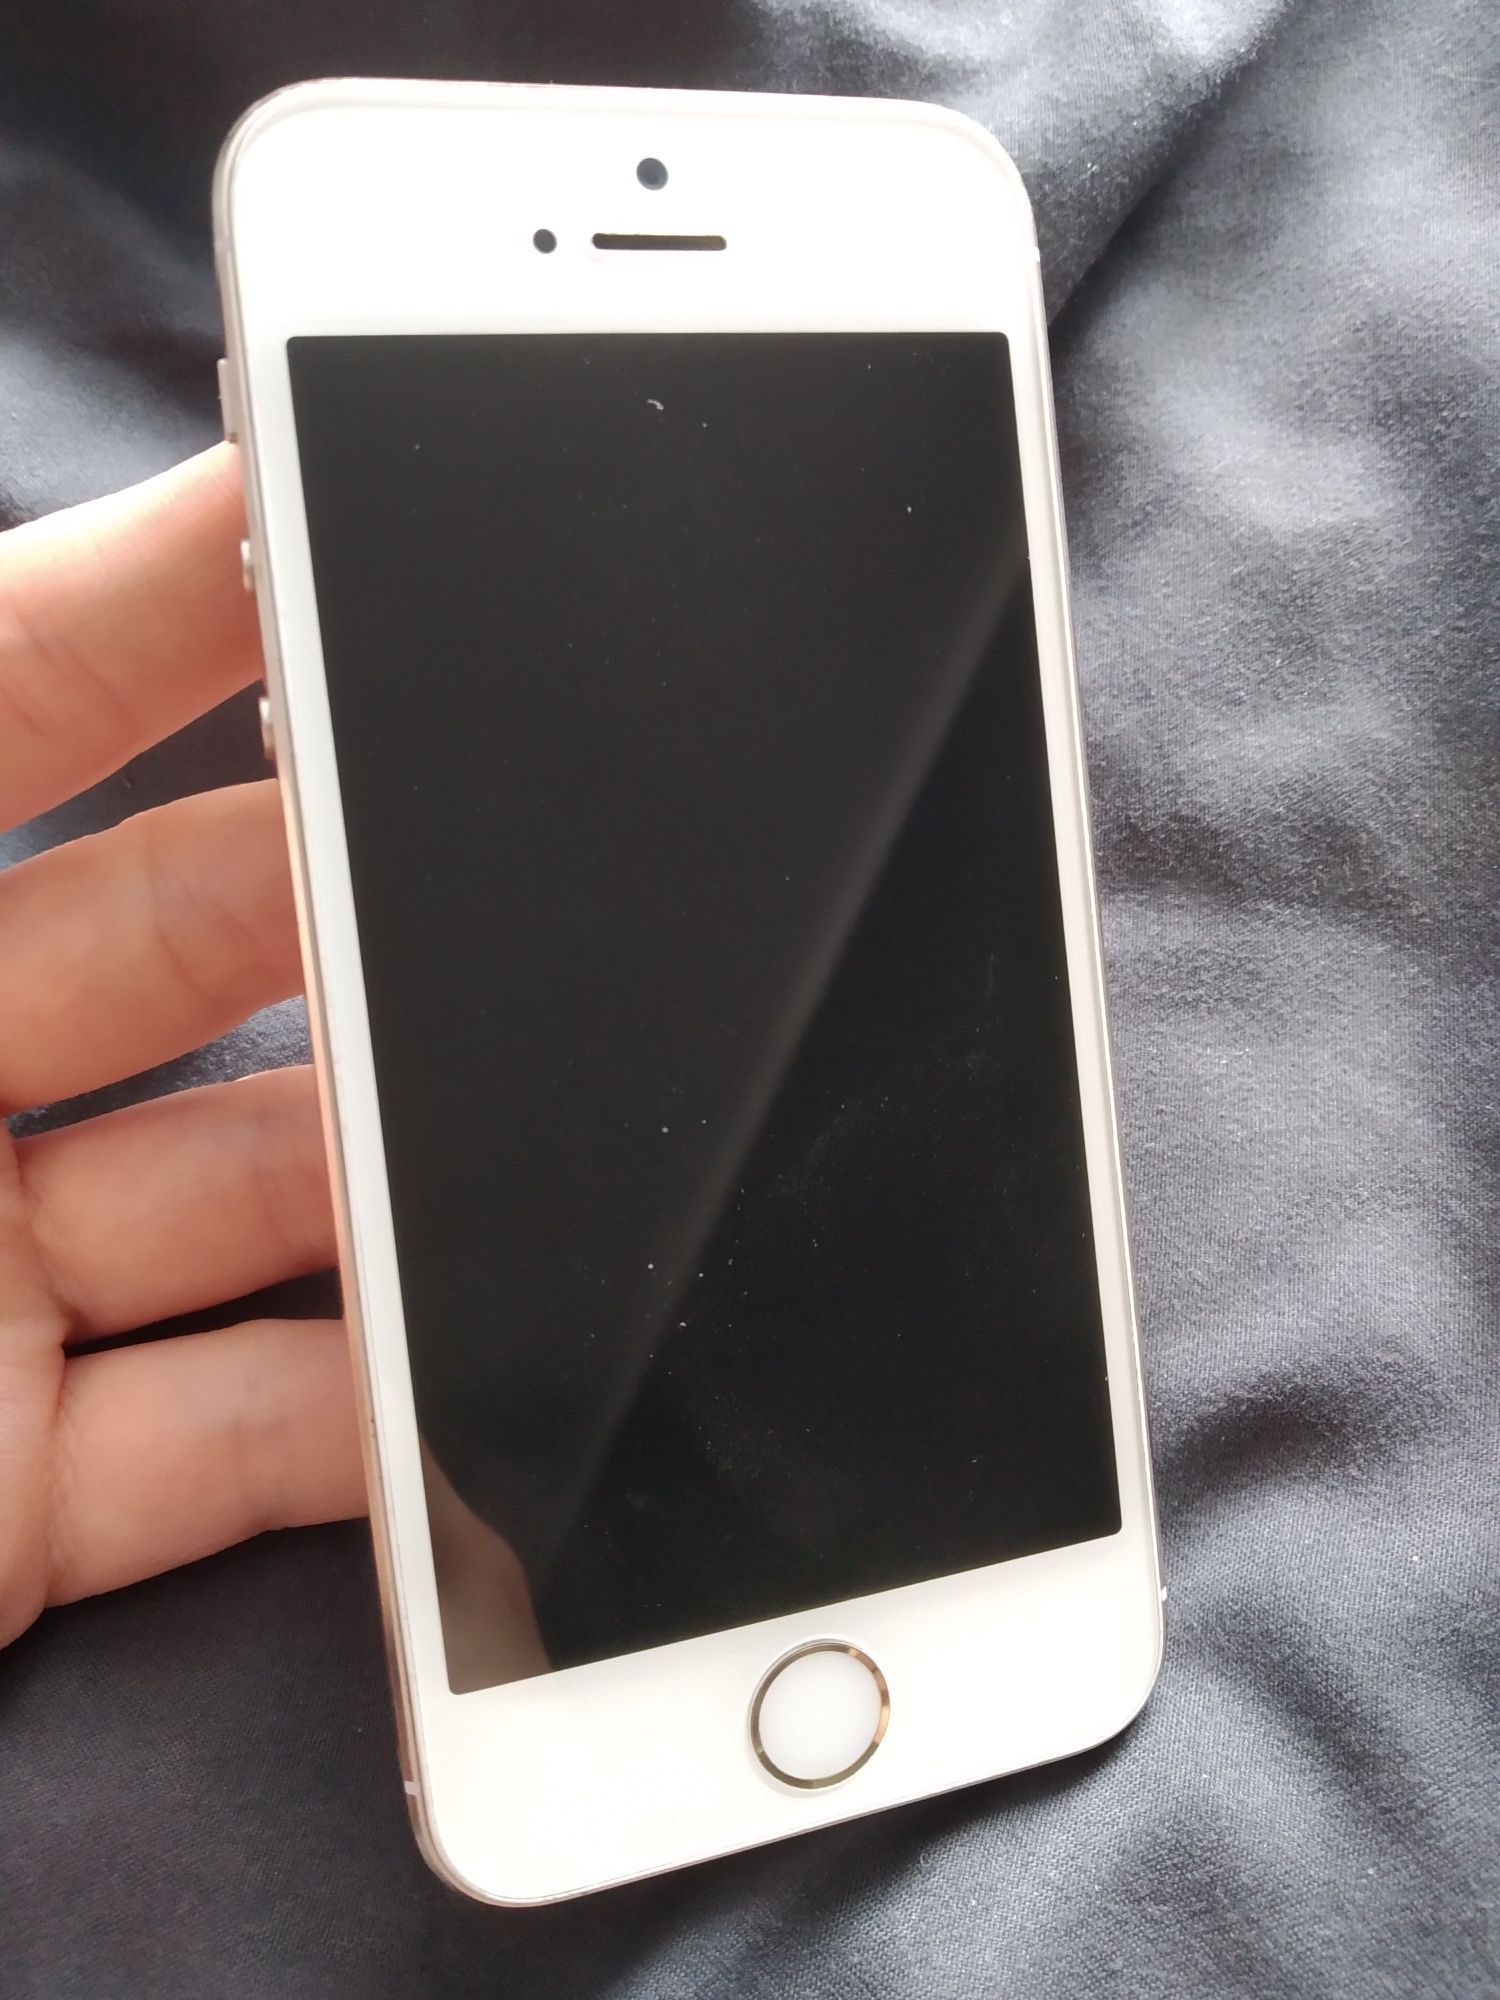 IPhone 5S model A1533